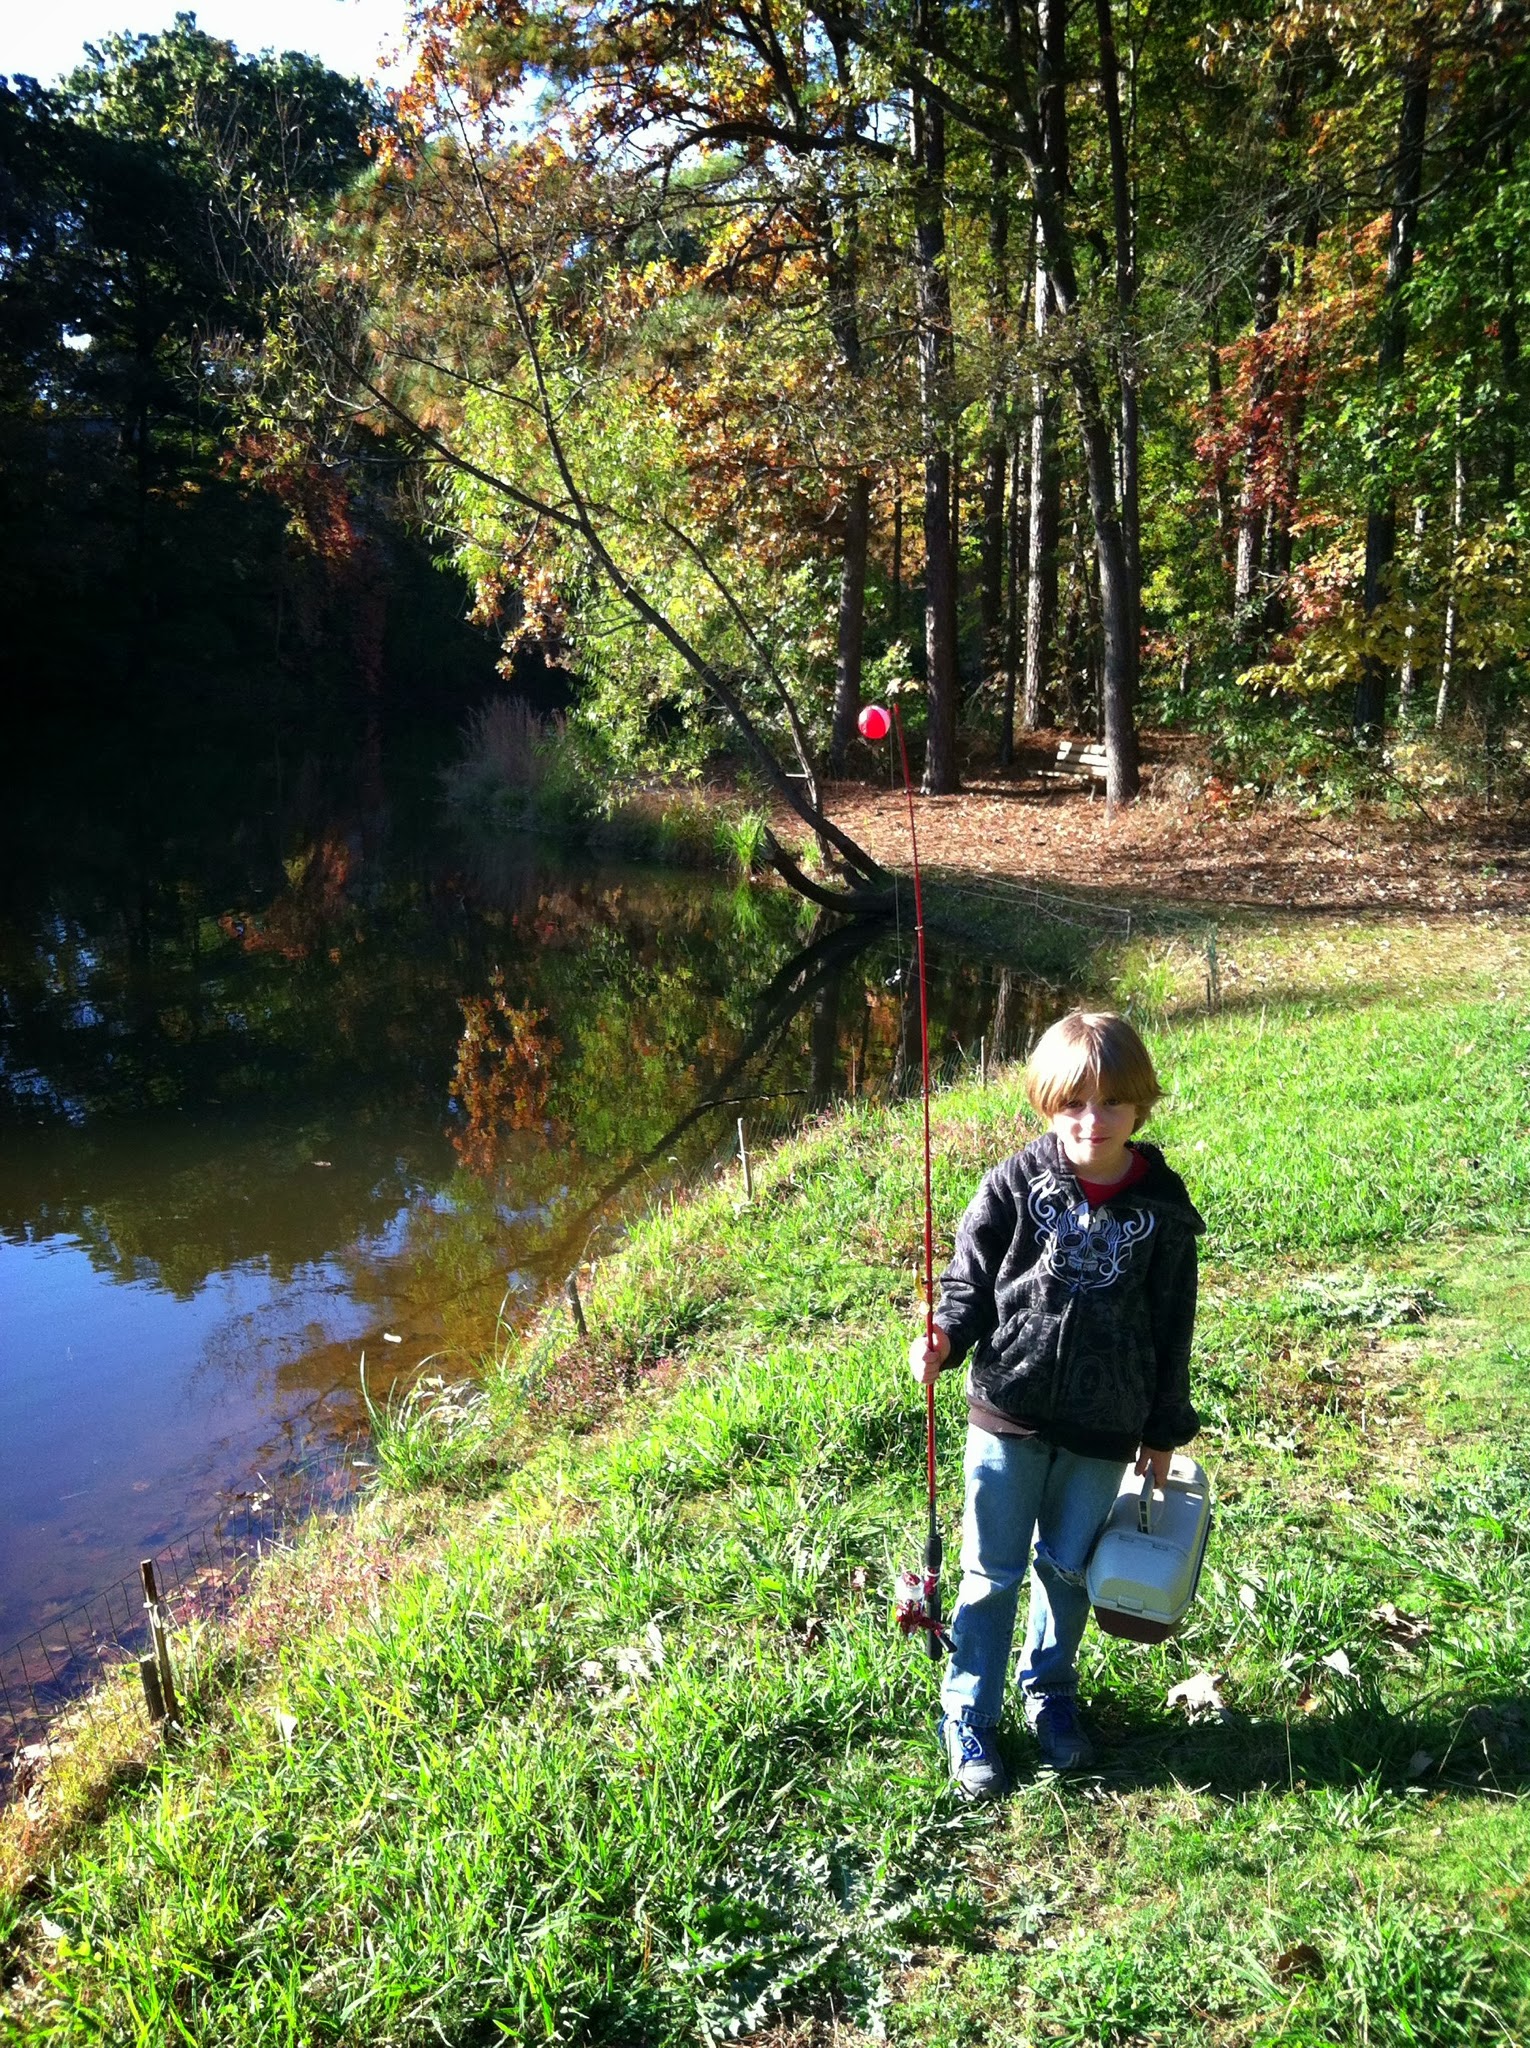 After the tool box, we went fishing -- also something we're learning together